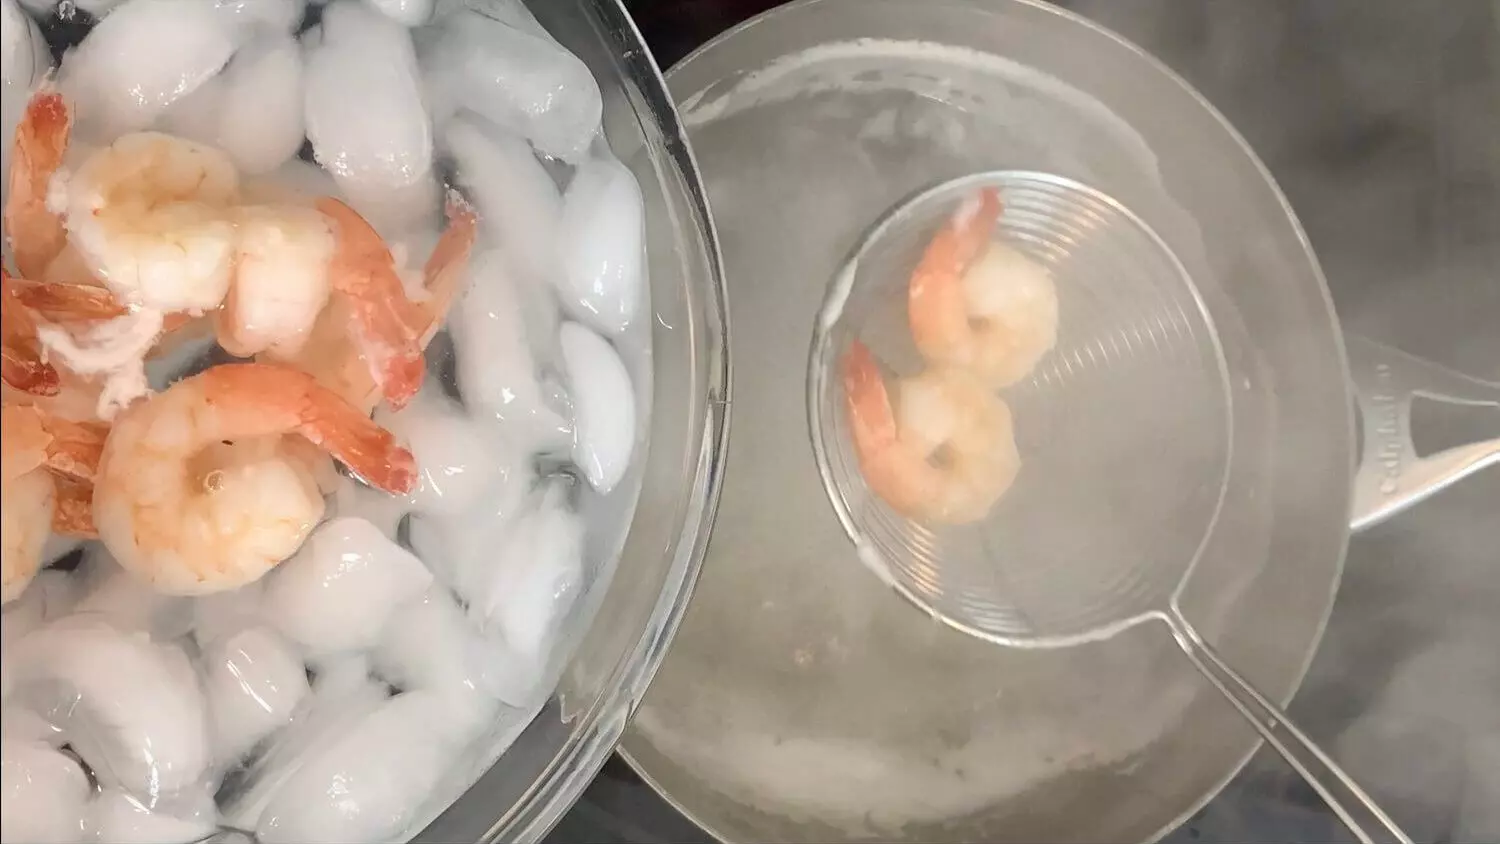 Remove shrimp from boiling water and immediately add to ice water to stop cooking.